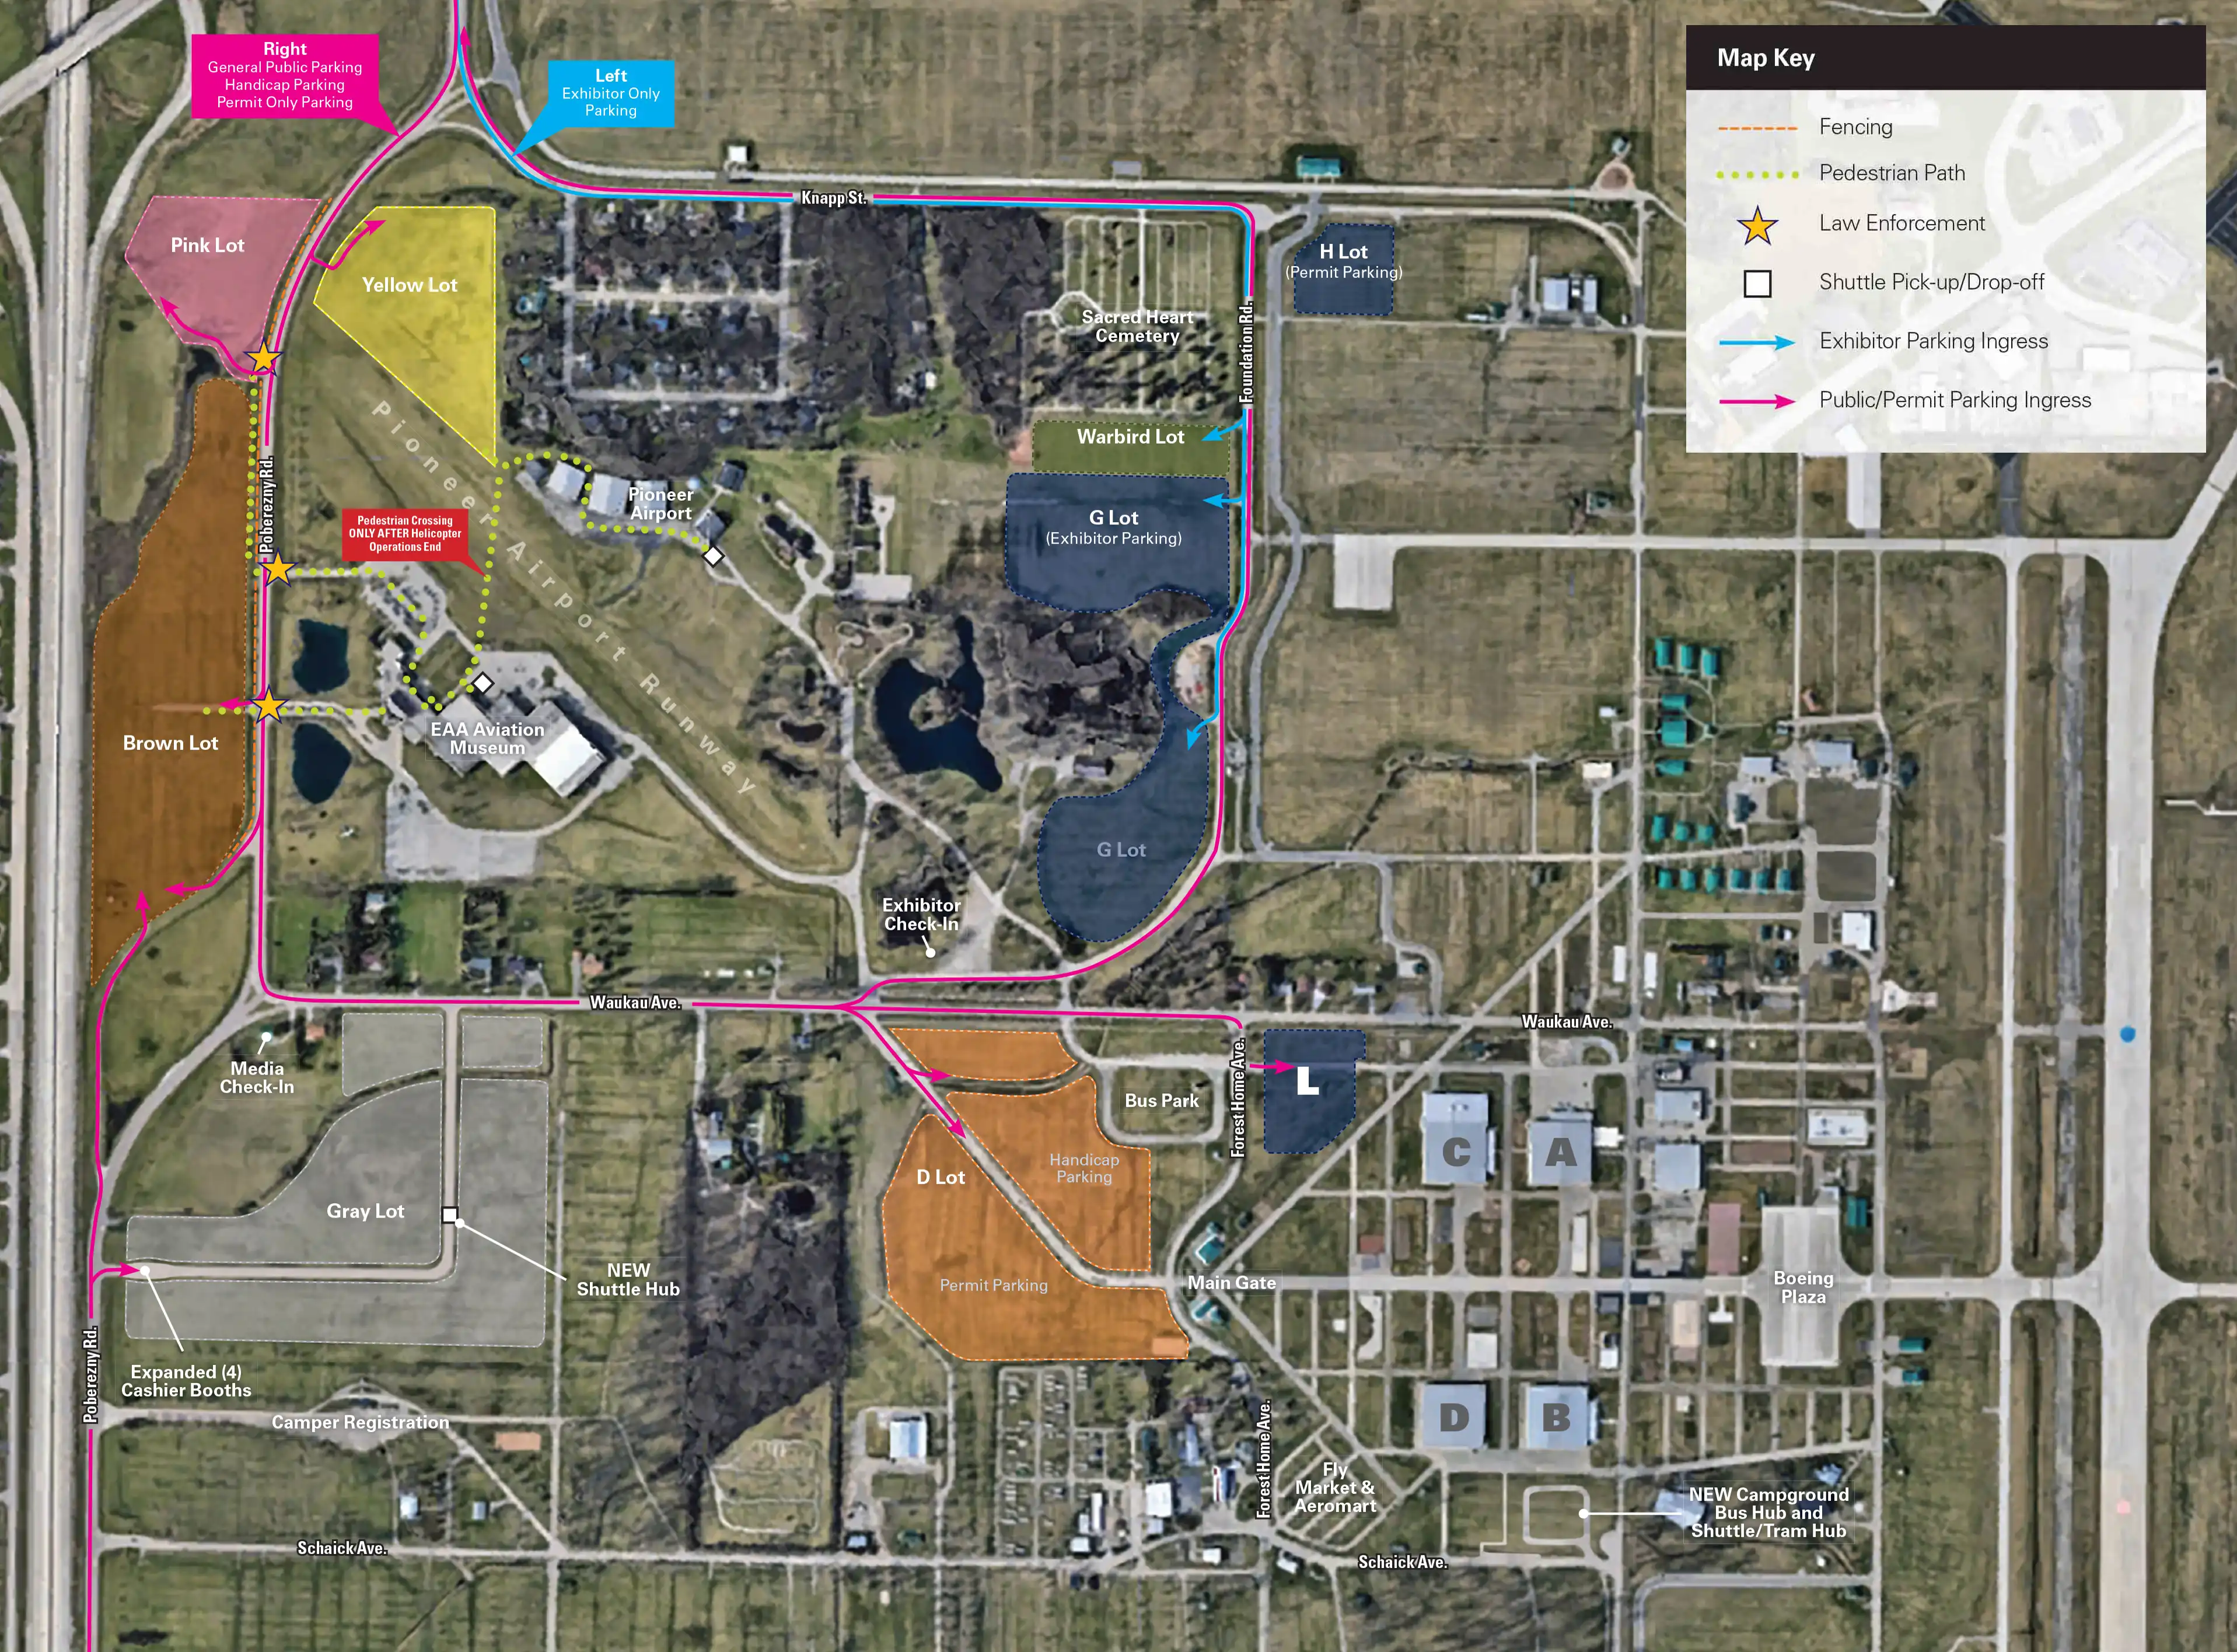 Airventure map of public parking lots